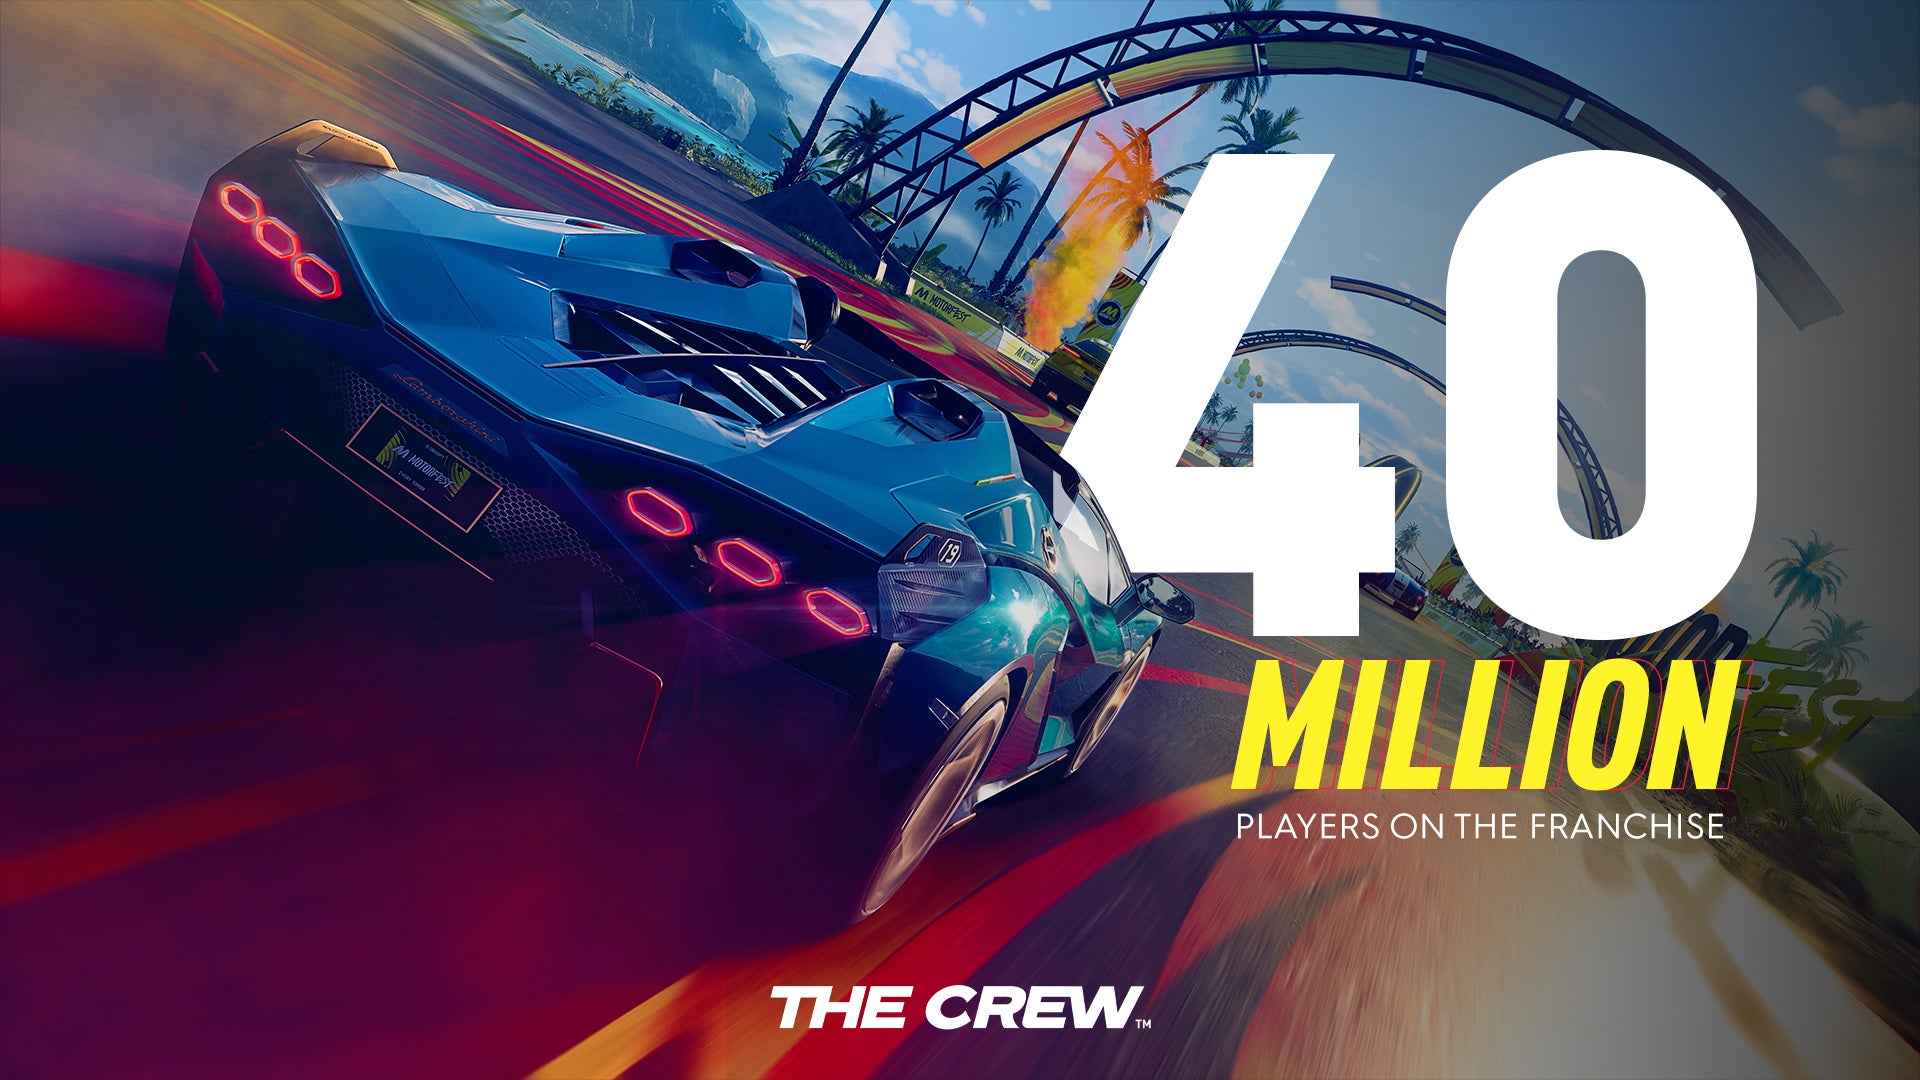 Image for The Crew franchise has reached 40m players | News-in-brief